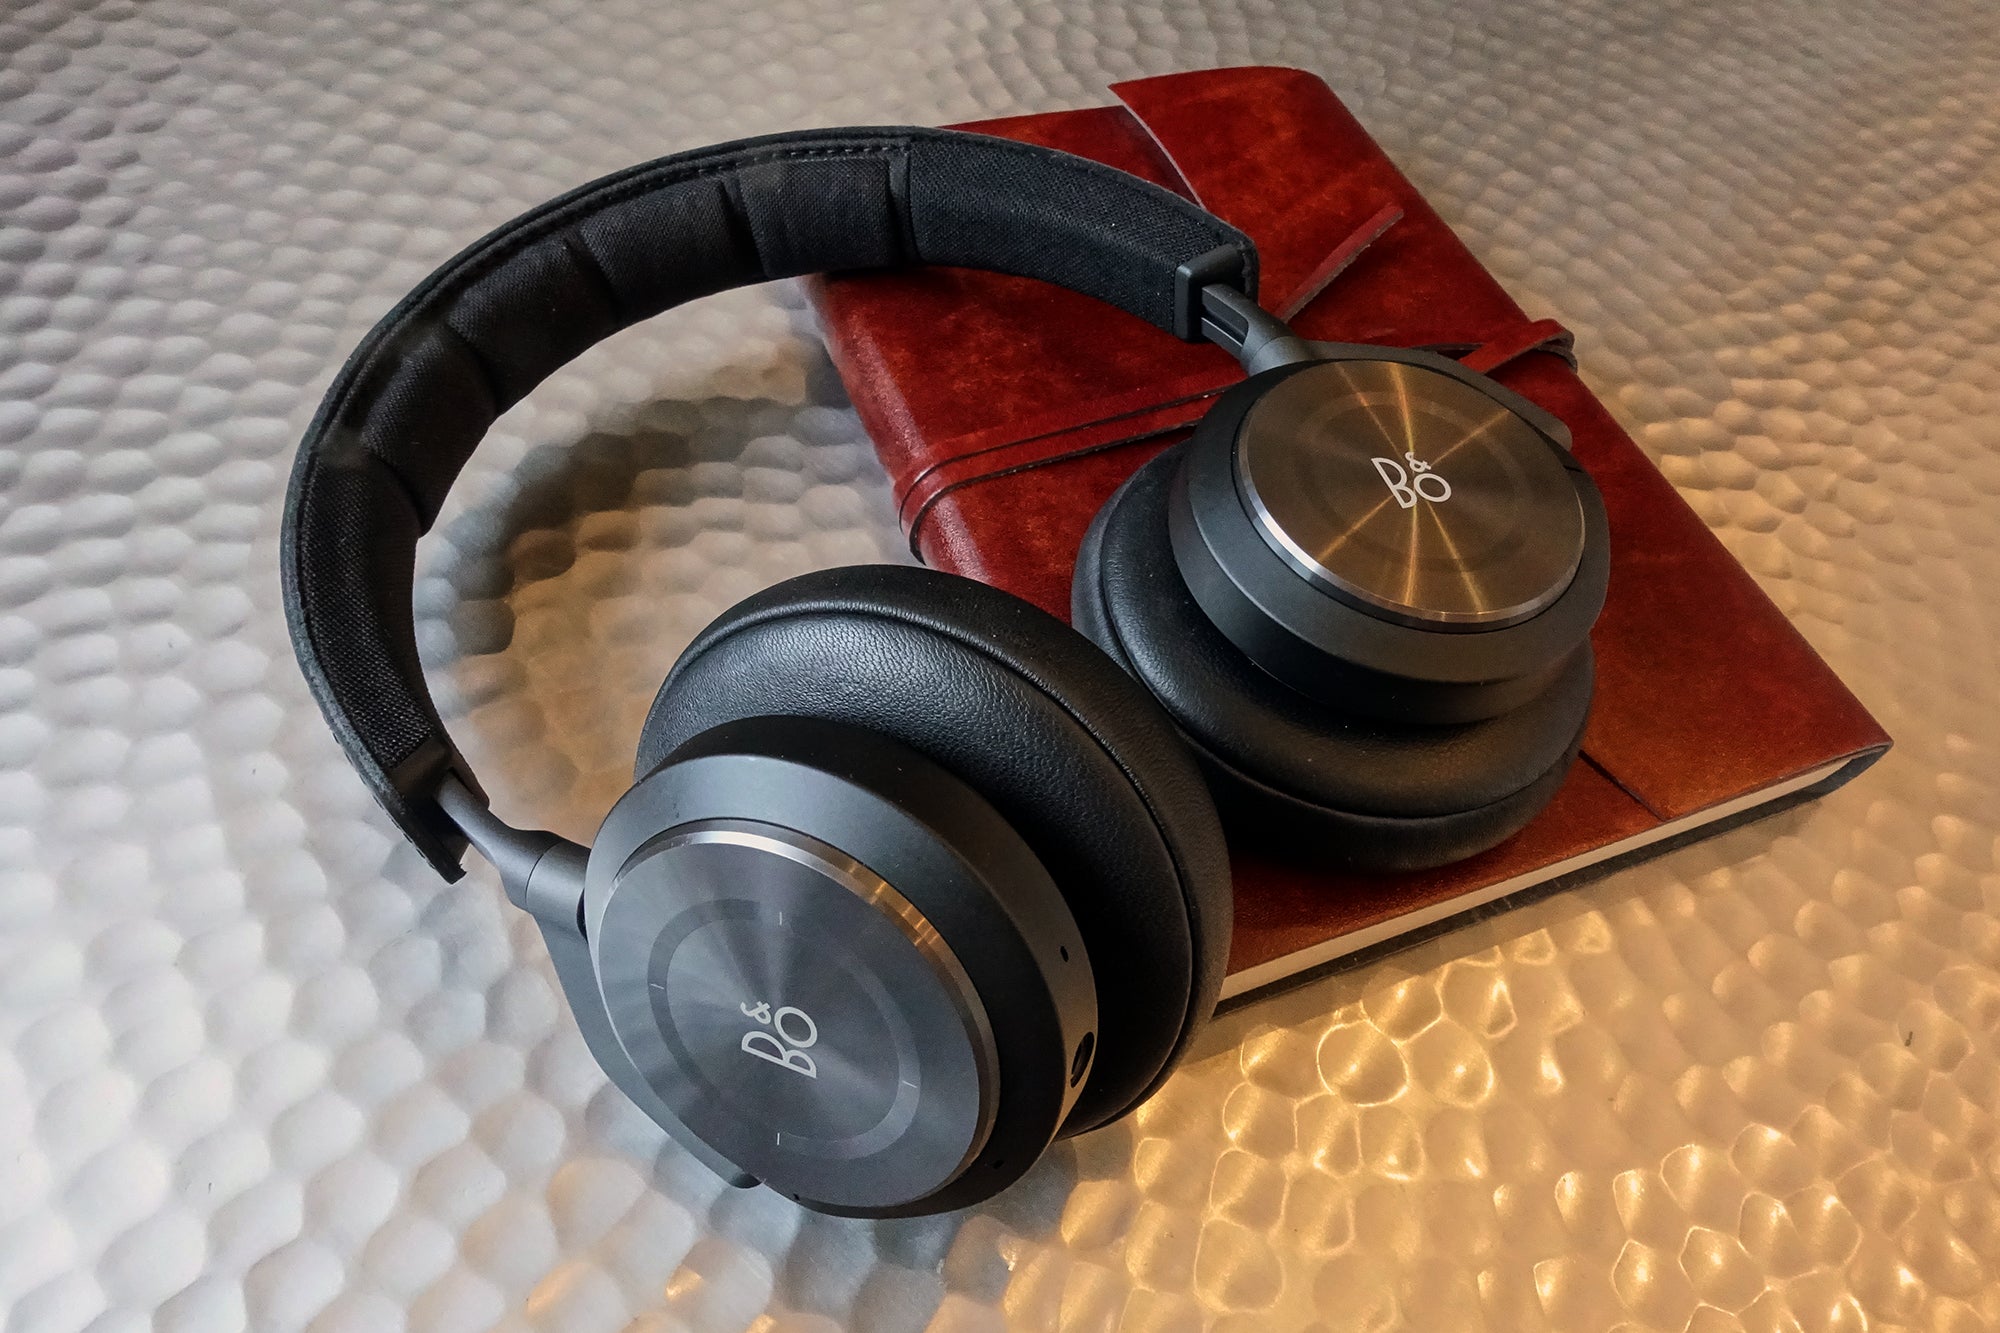 B&O Beoplay H9i: expensive but worthy wireless headphones